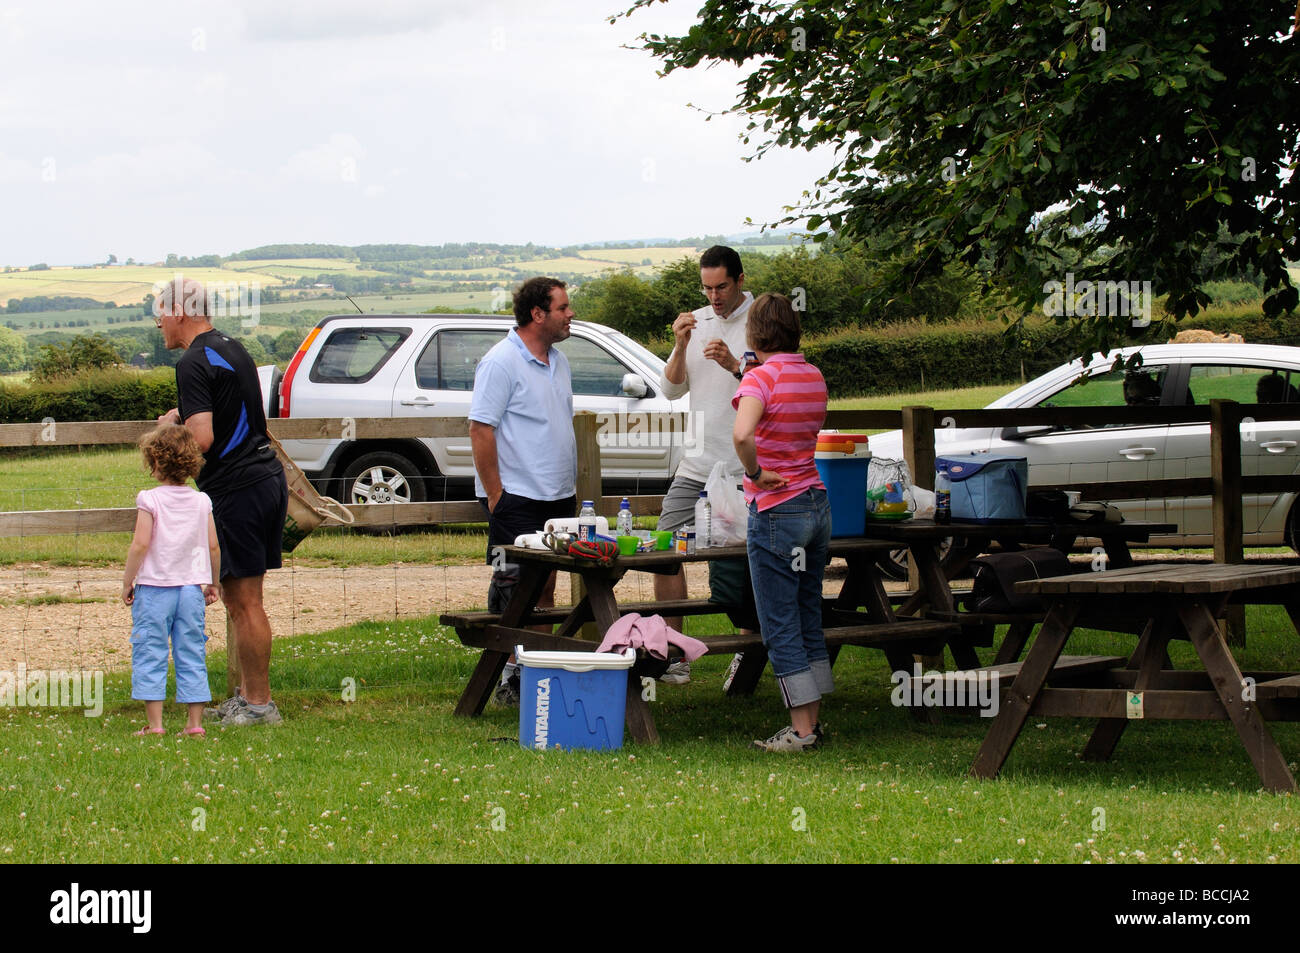 Picnicing at the Cotswold Farm Park in Guiting Power Gloucestershire England UK Stock Photo